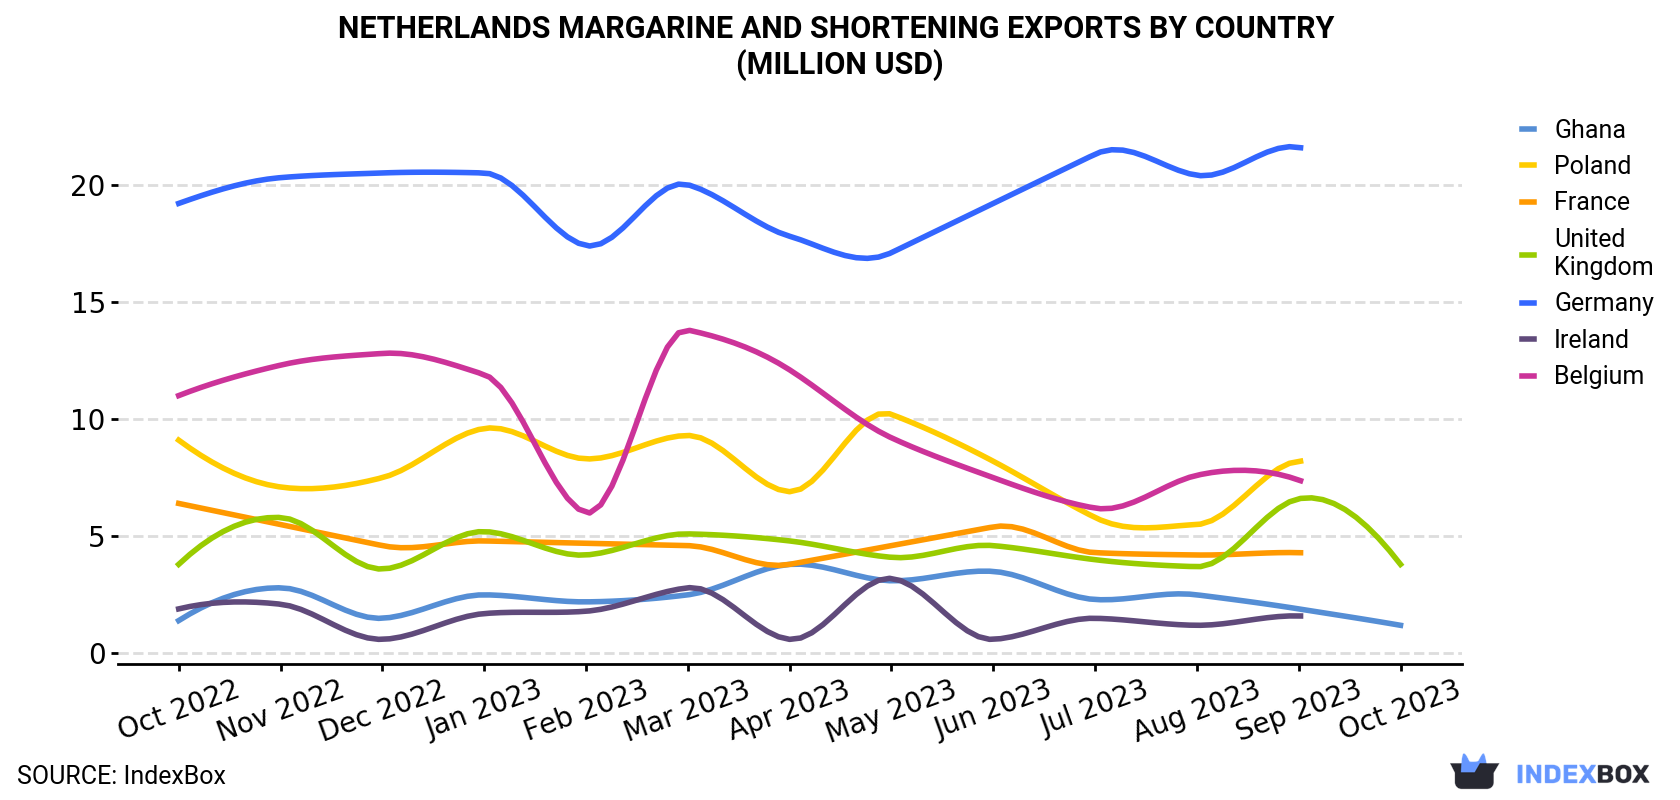 Netherlands Margarine And Shortening Exports By Country (Million USD)